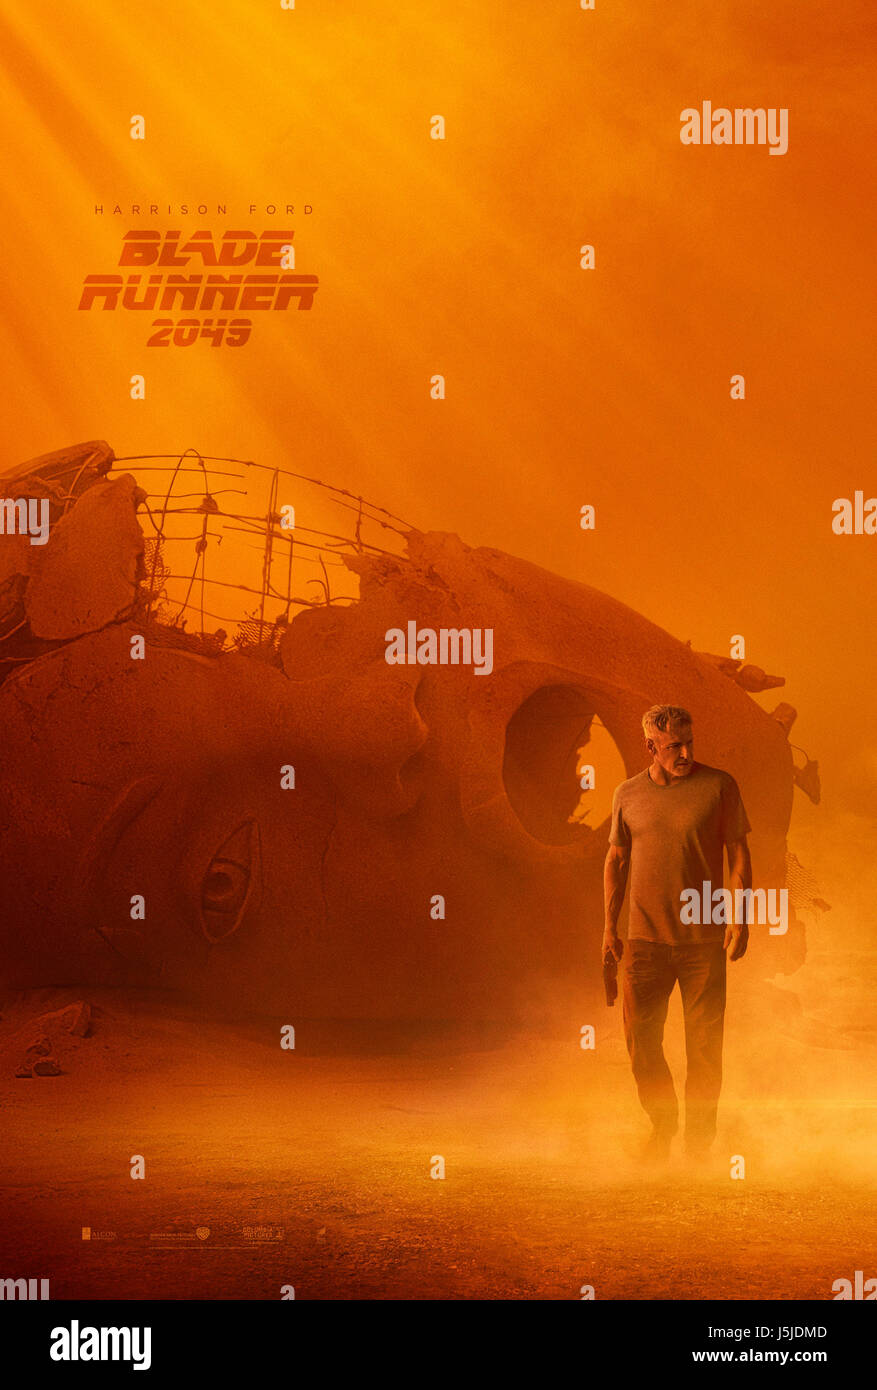 LEASE DATE: October 6, 2017 TITLE: Blade Runner 2049 STUDIO: Columbia Pictures DIRECTOR: Denis Villeneuve PLOT: Thirty years after the events of the first film, a new blade runner, LAPD Officer K (Ryan Gosling), unearths a long-buried secret that has the potential to plunge what's left of society into chaos. K's discovery leads him on a quest to find Rick Deckard (Harrison Ford), a former LAPD blade runner who has been missing for 30 years STARRING: Harrison Ford Poster Art (Credit: © Columbia Pictures/Entertainment Pictures) Stock Photo